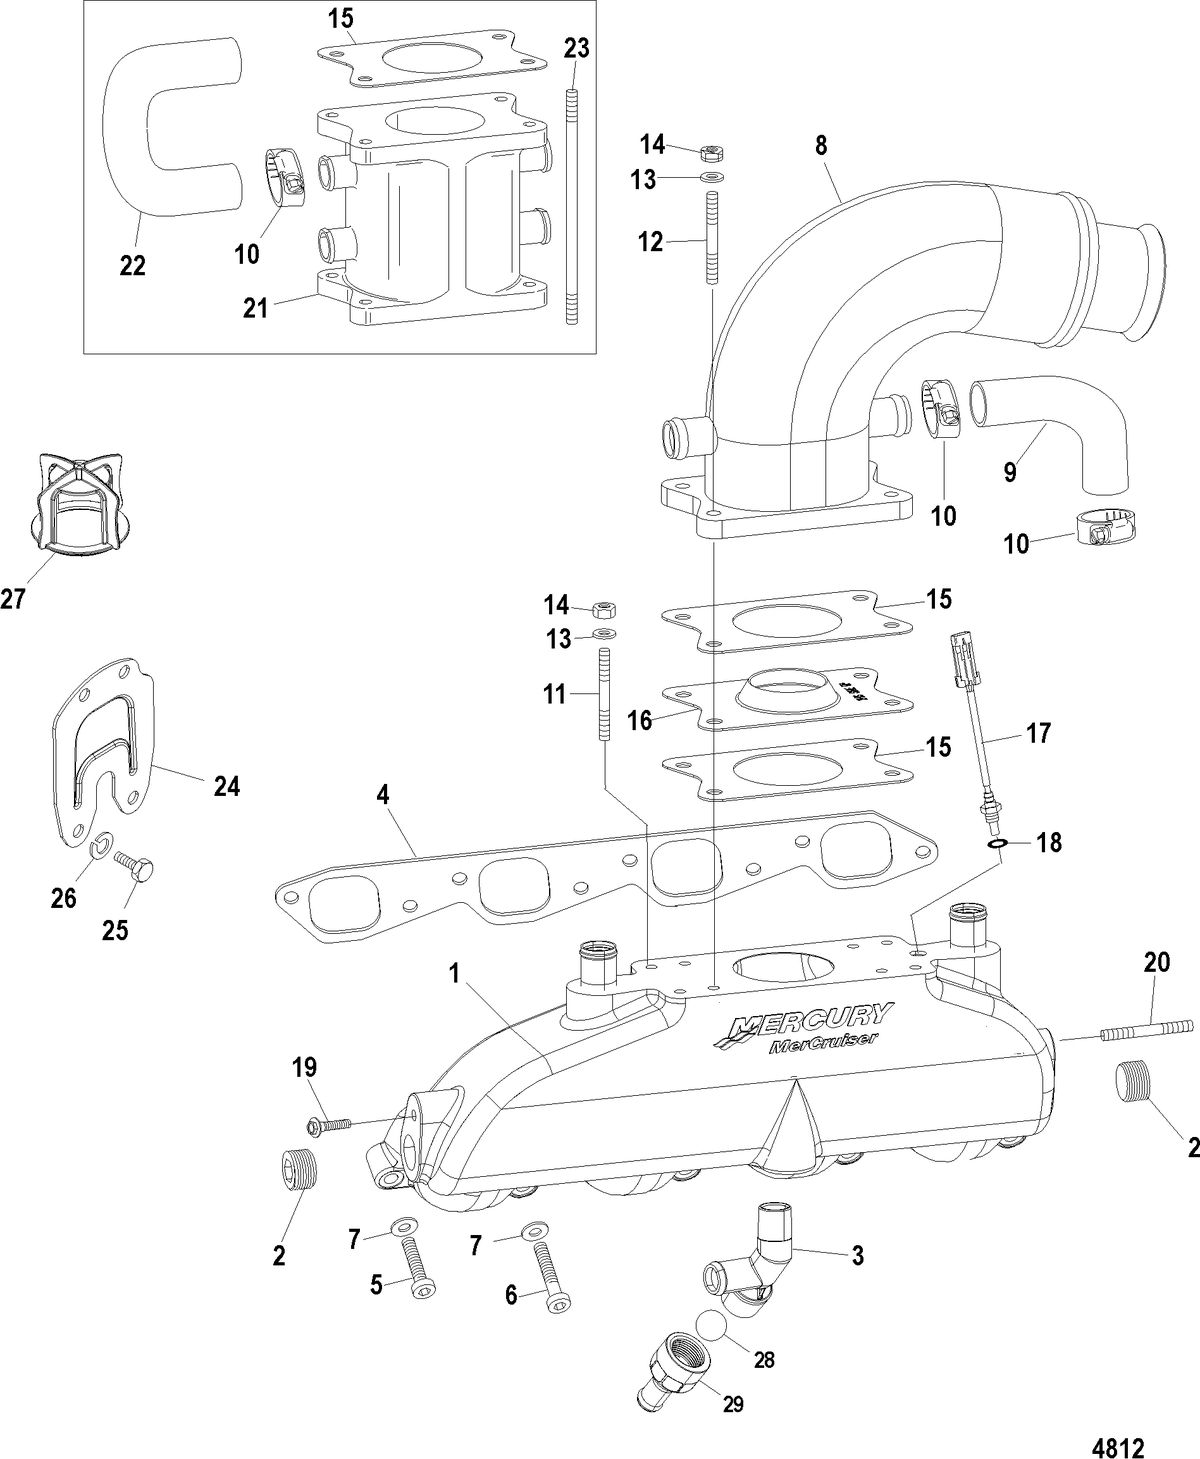 MERCRUISER 496 MAG STERNDRIVE Exhaust Manifold, Elbow and Riser